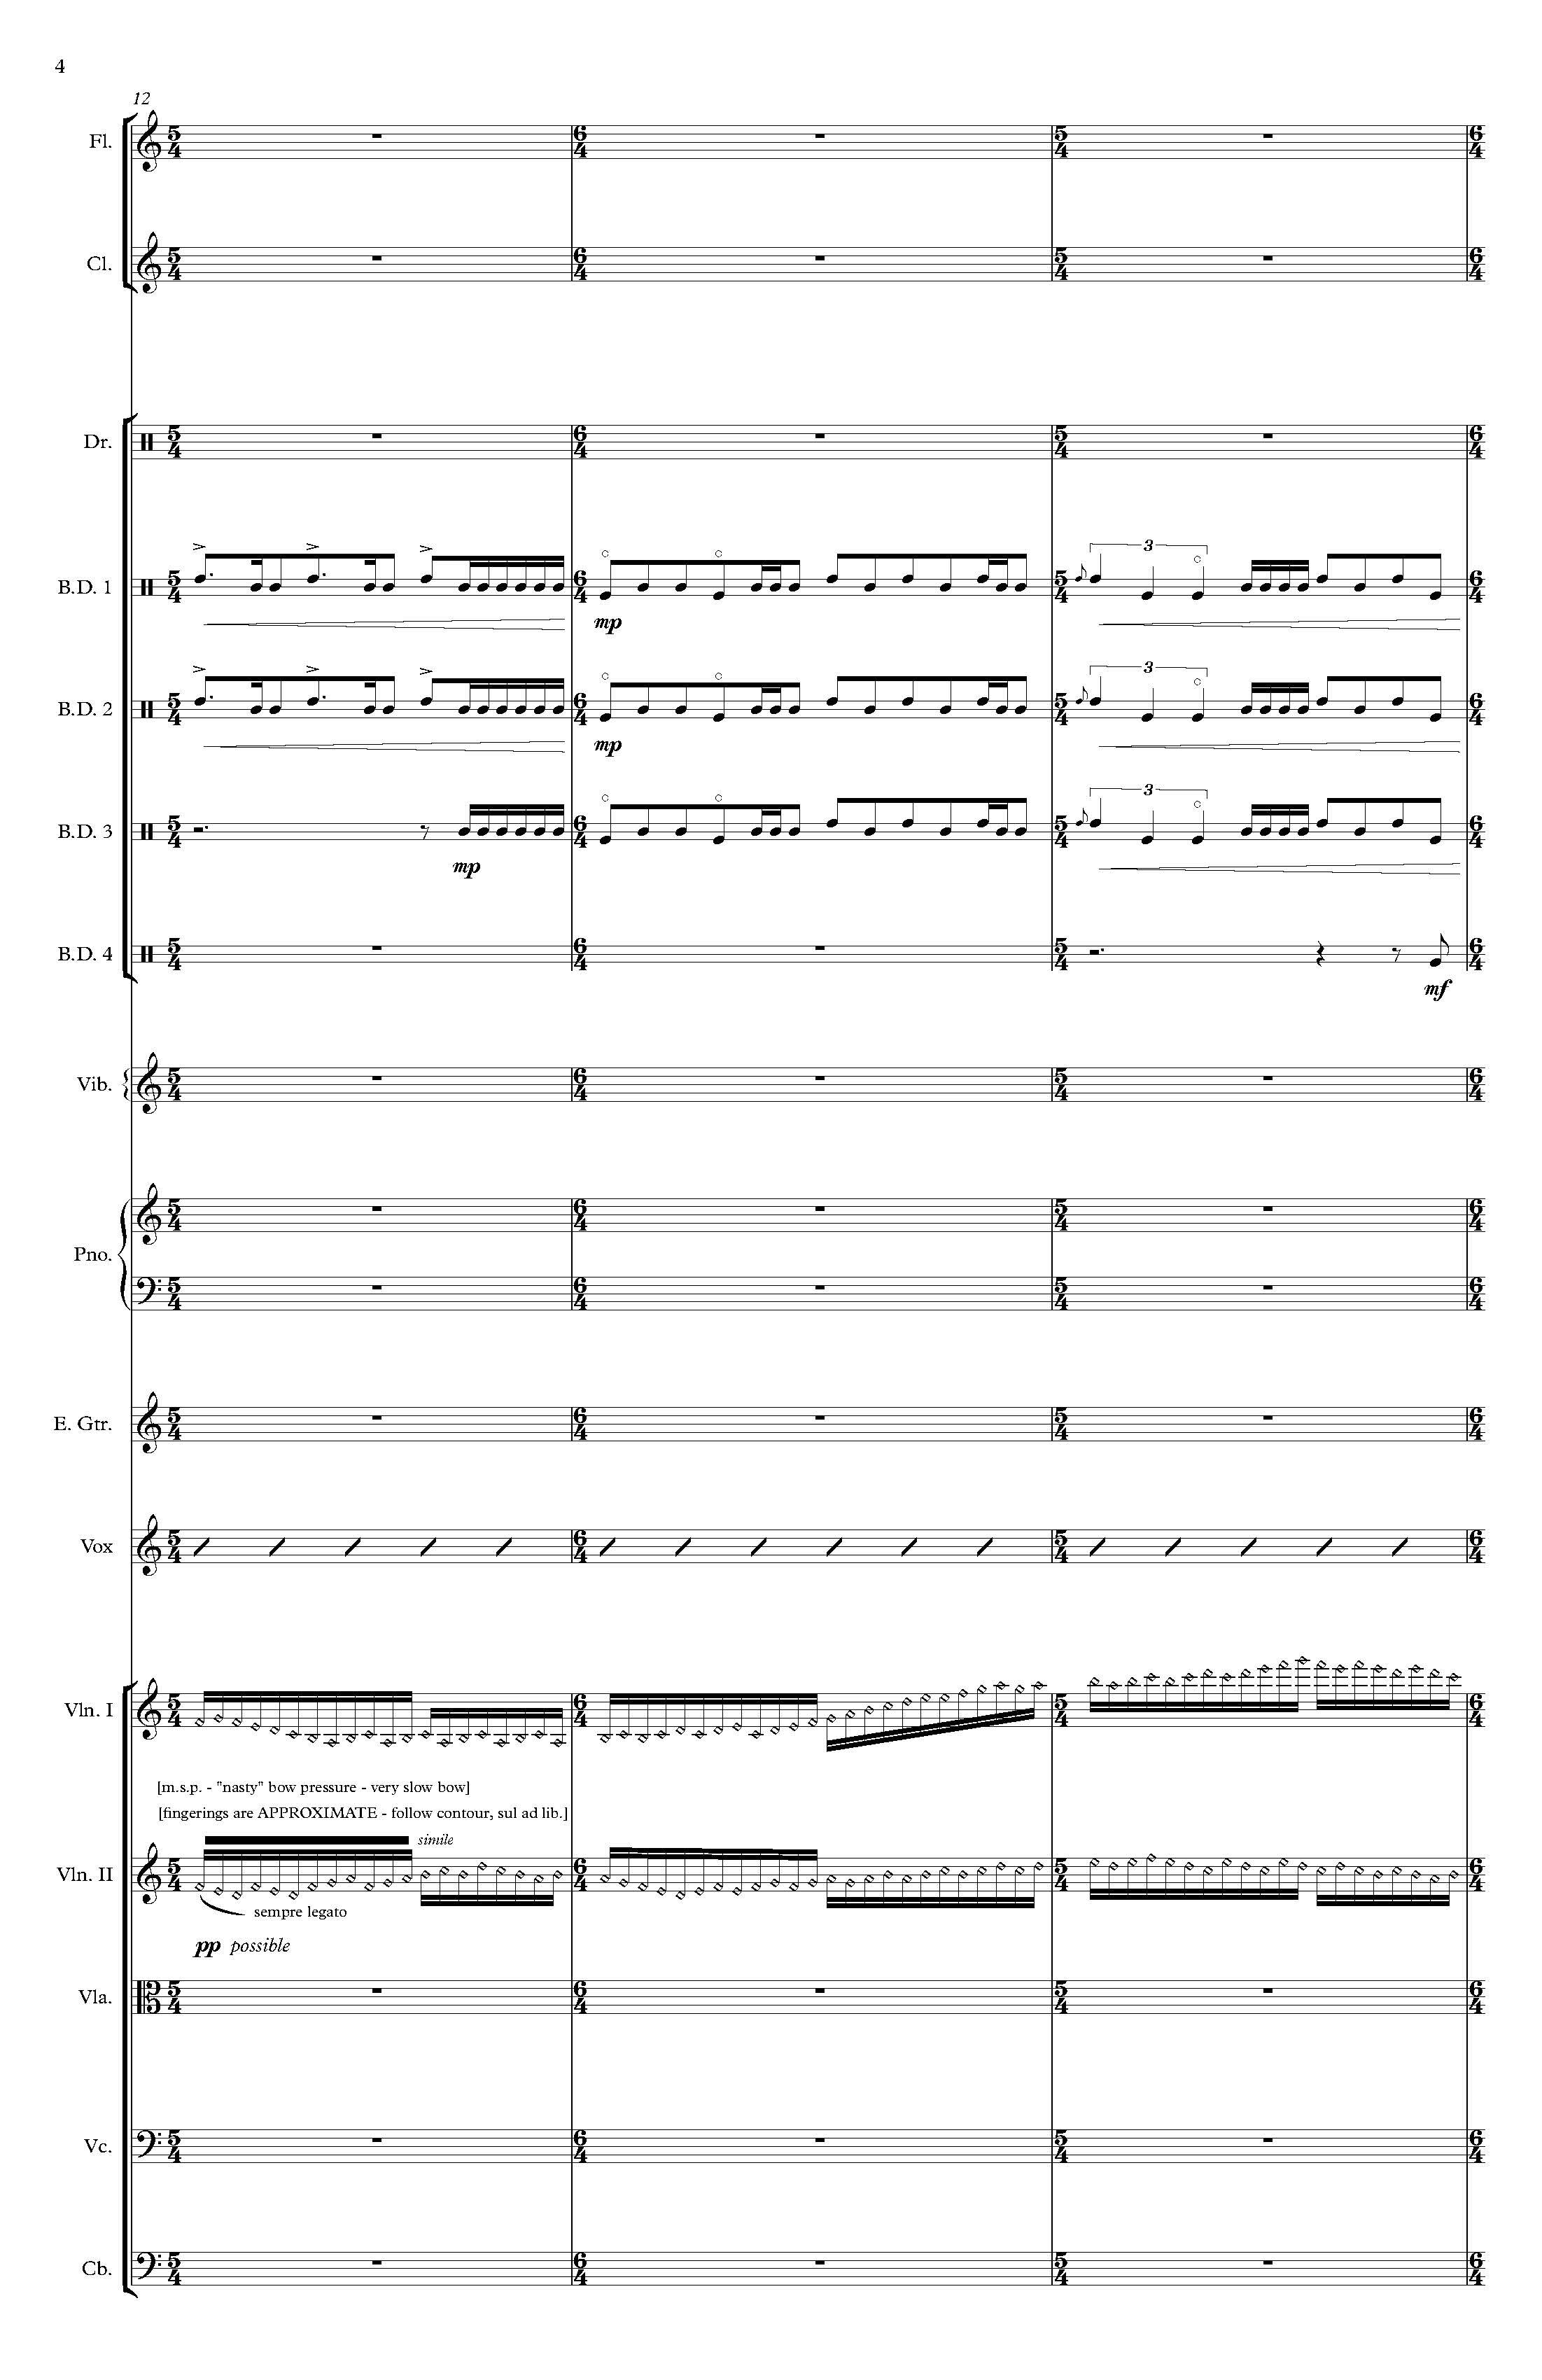 The Rembrandt of Avenue A - Complete Score_Page_10.jpg